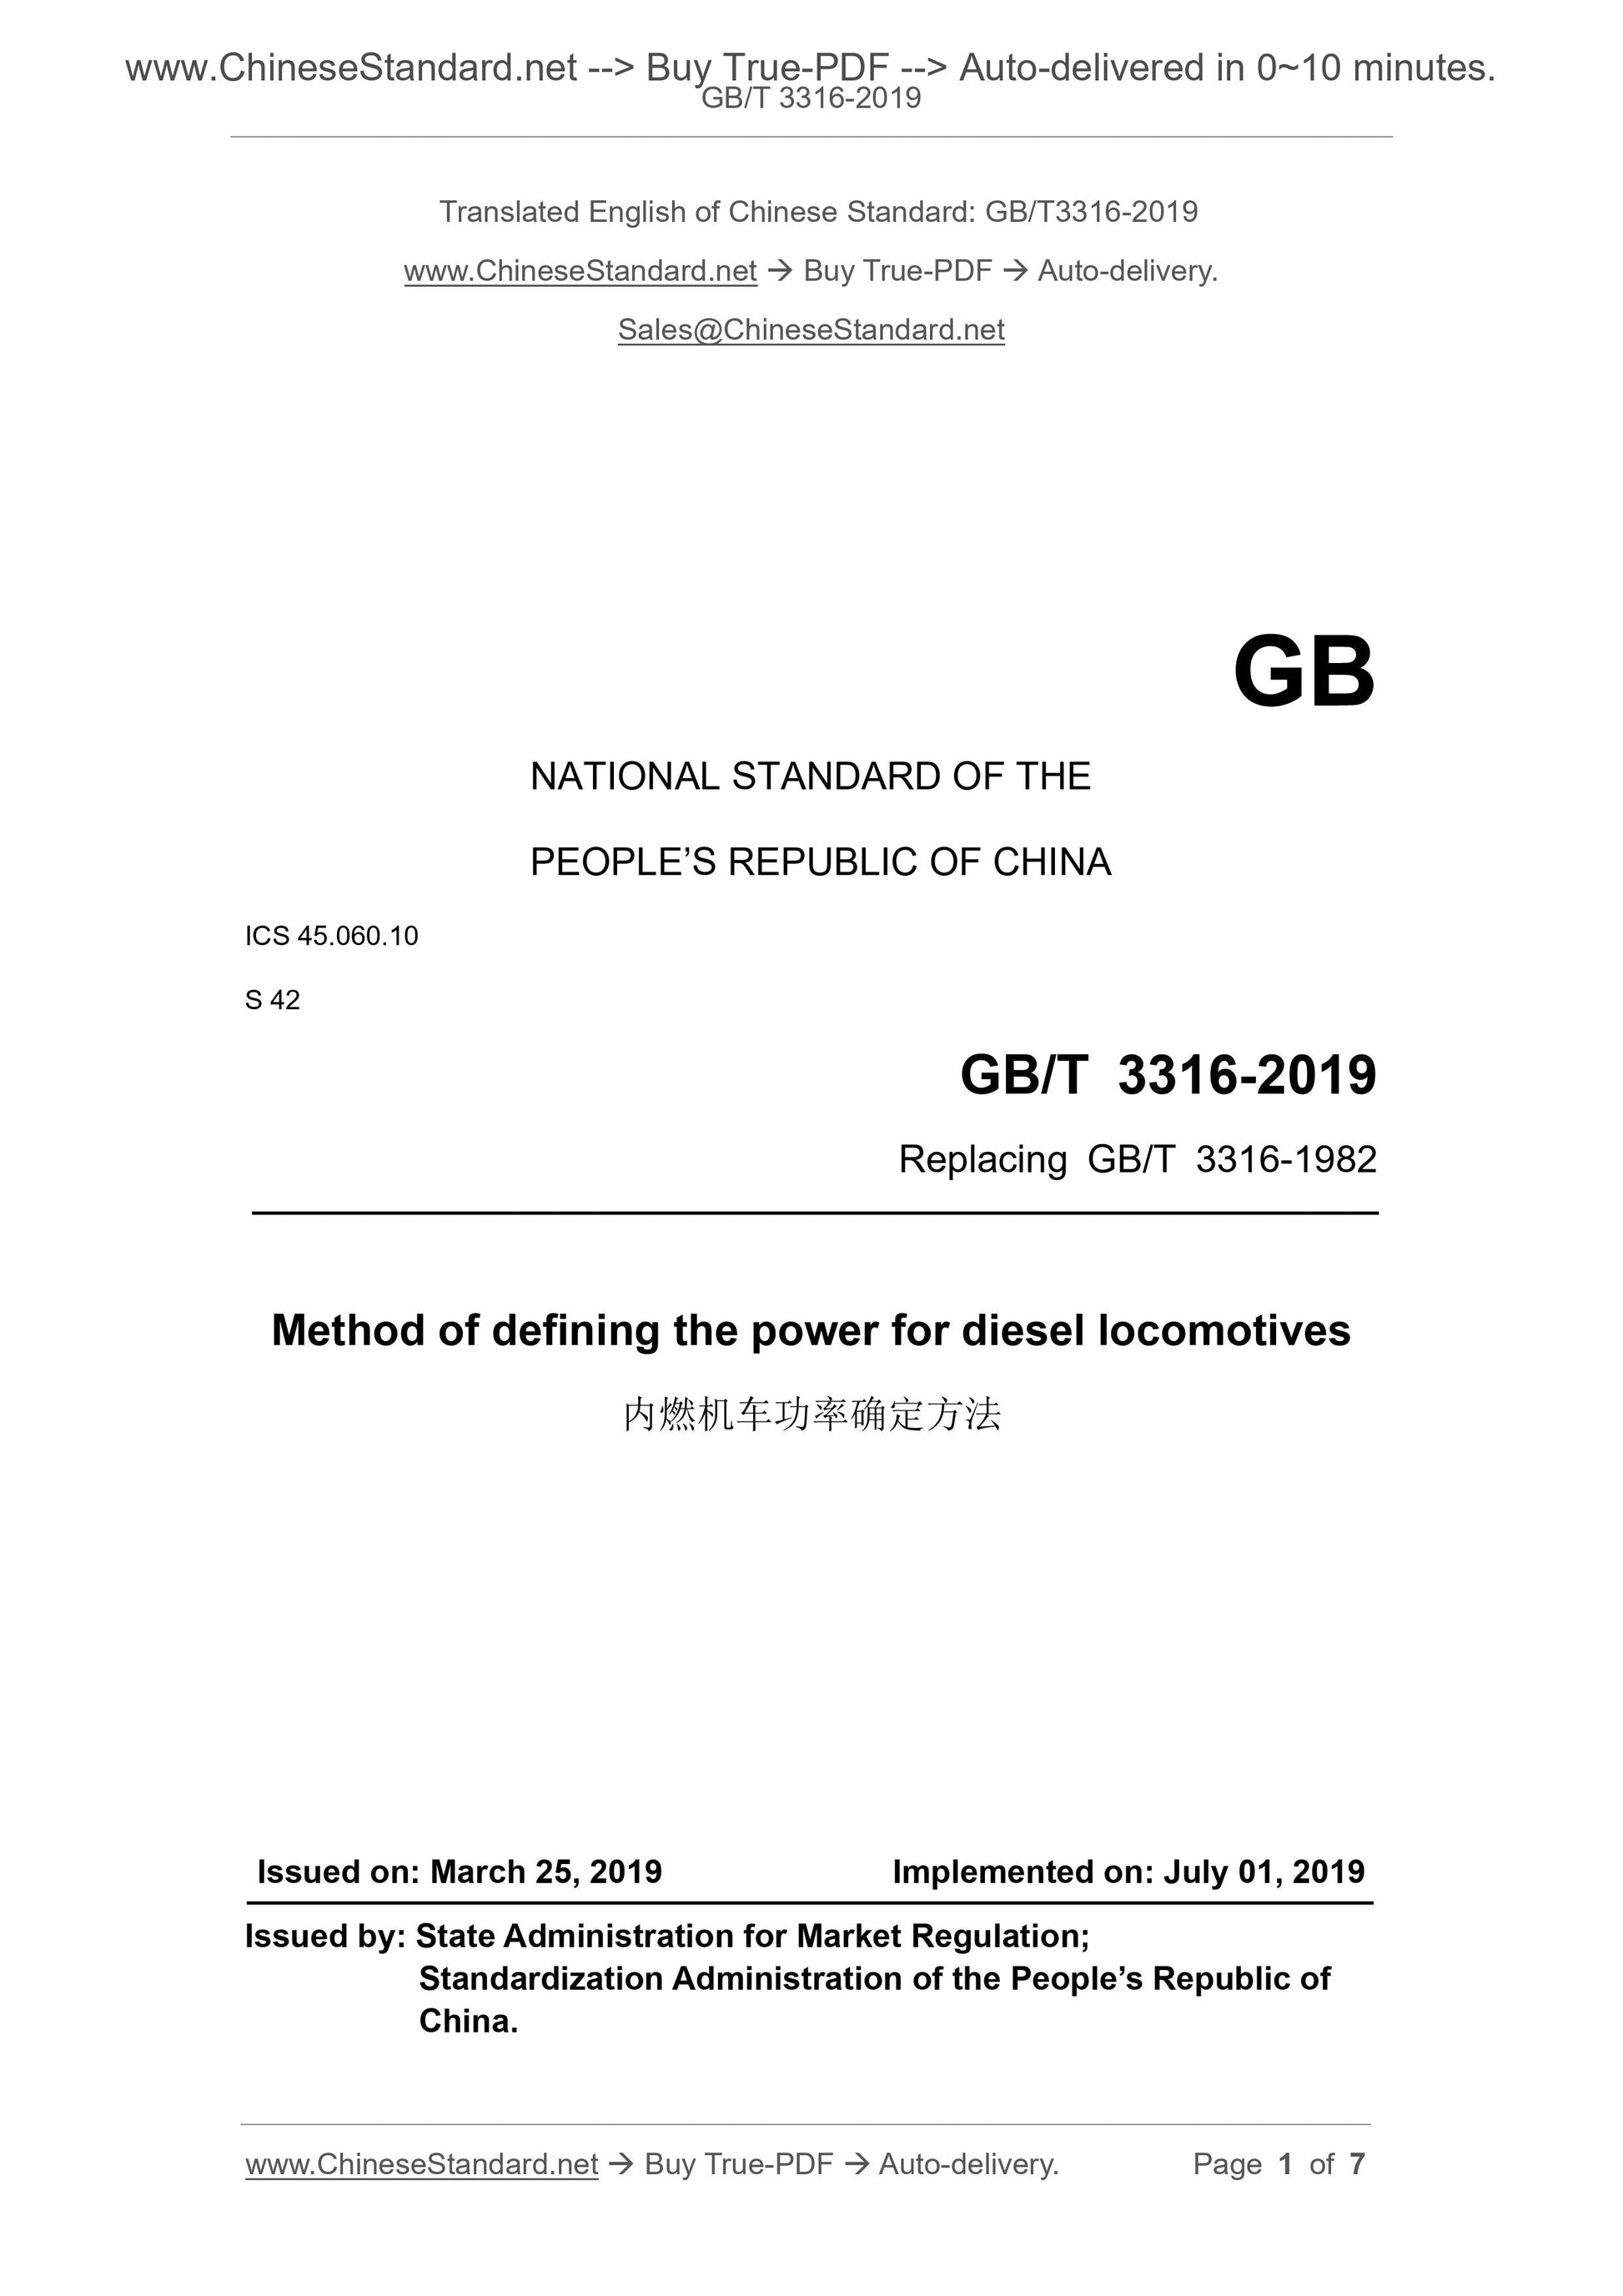 GB/T 3316-2019 Page 1